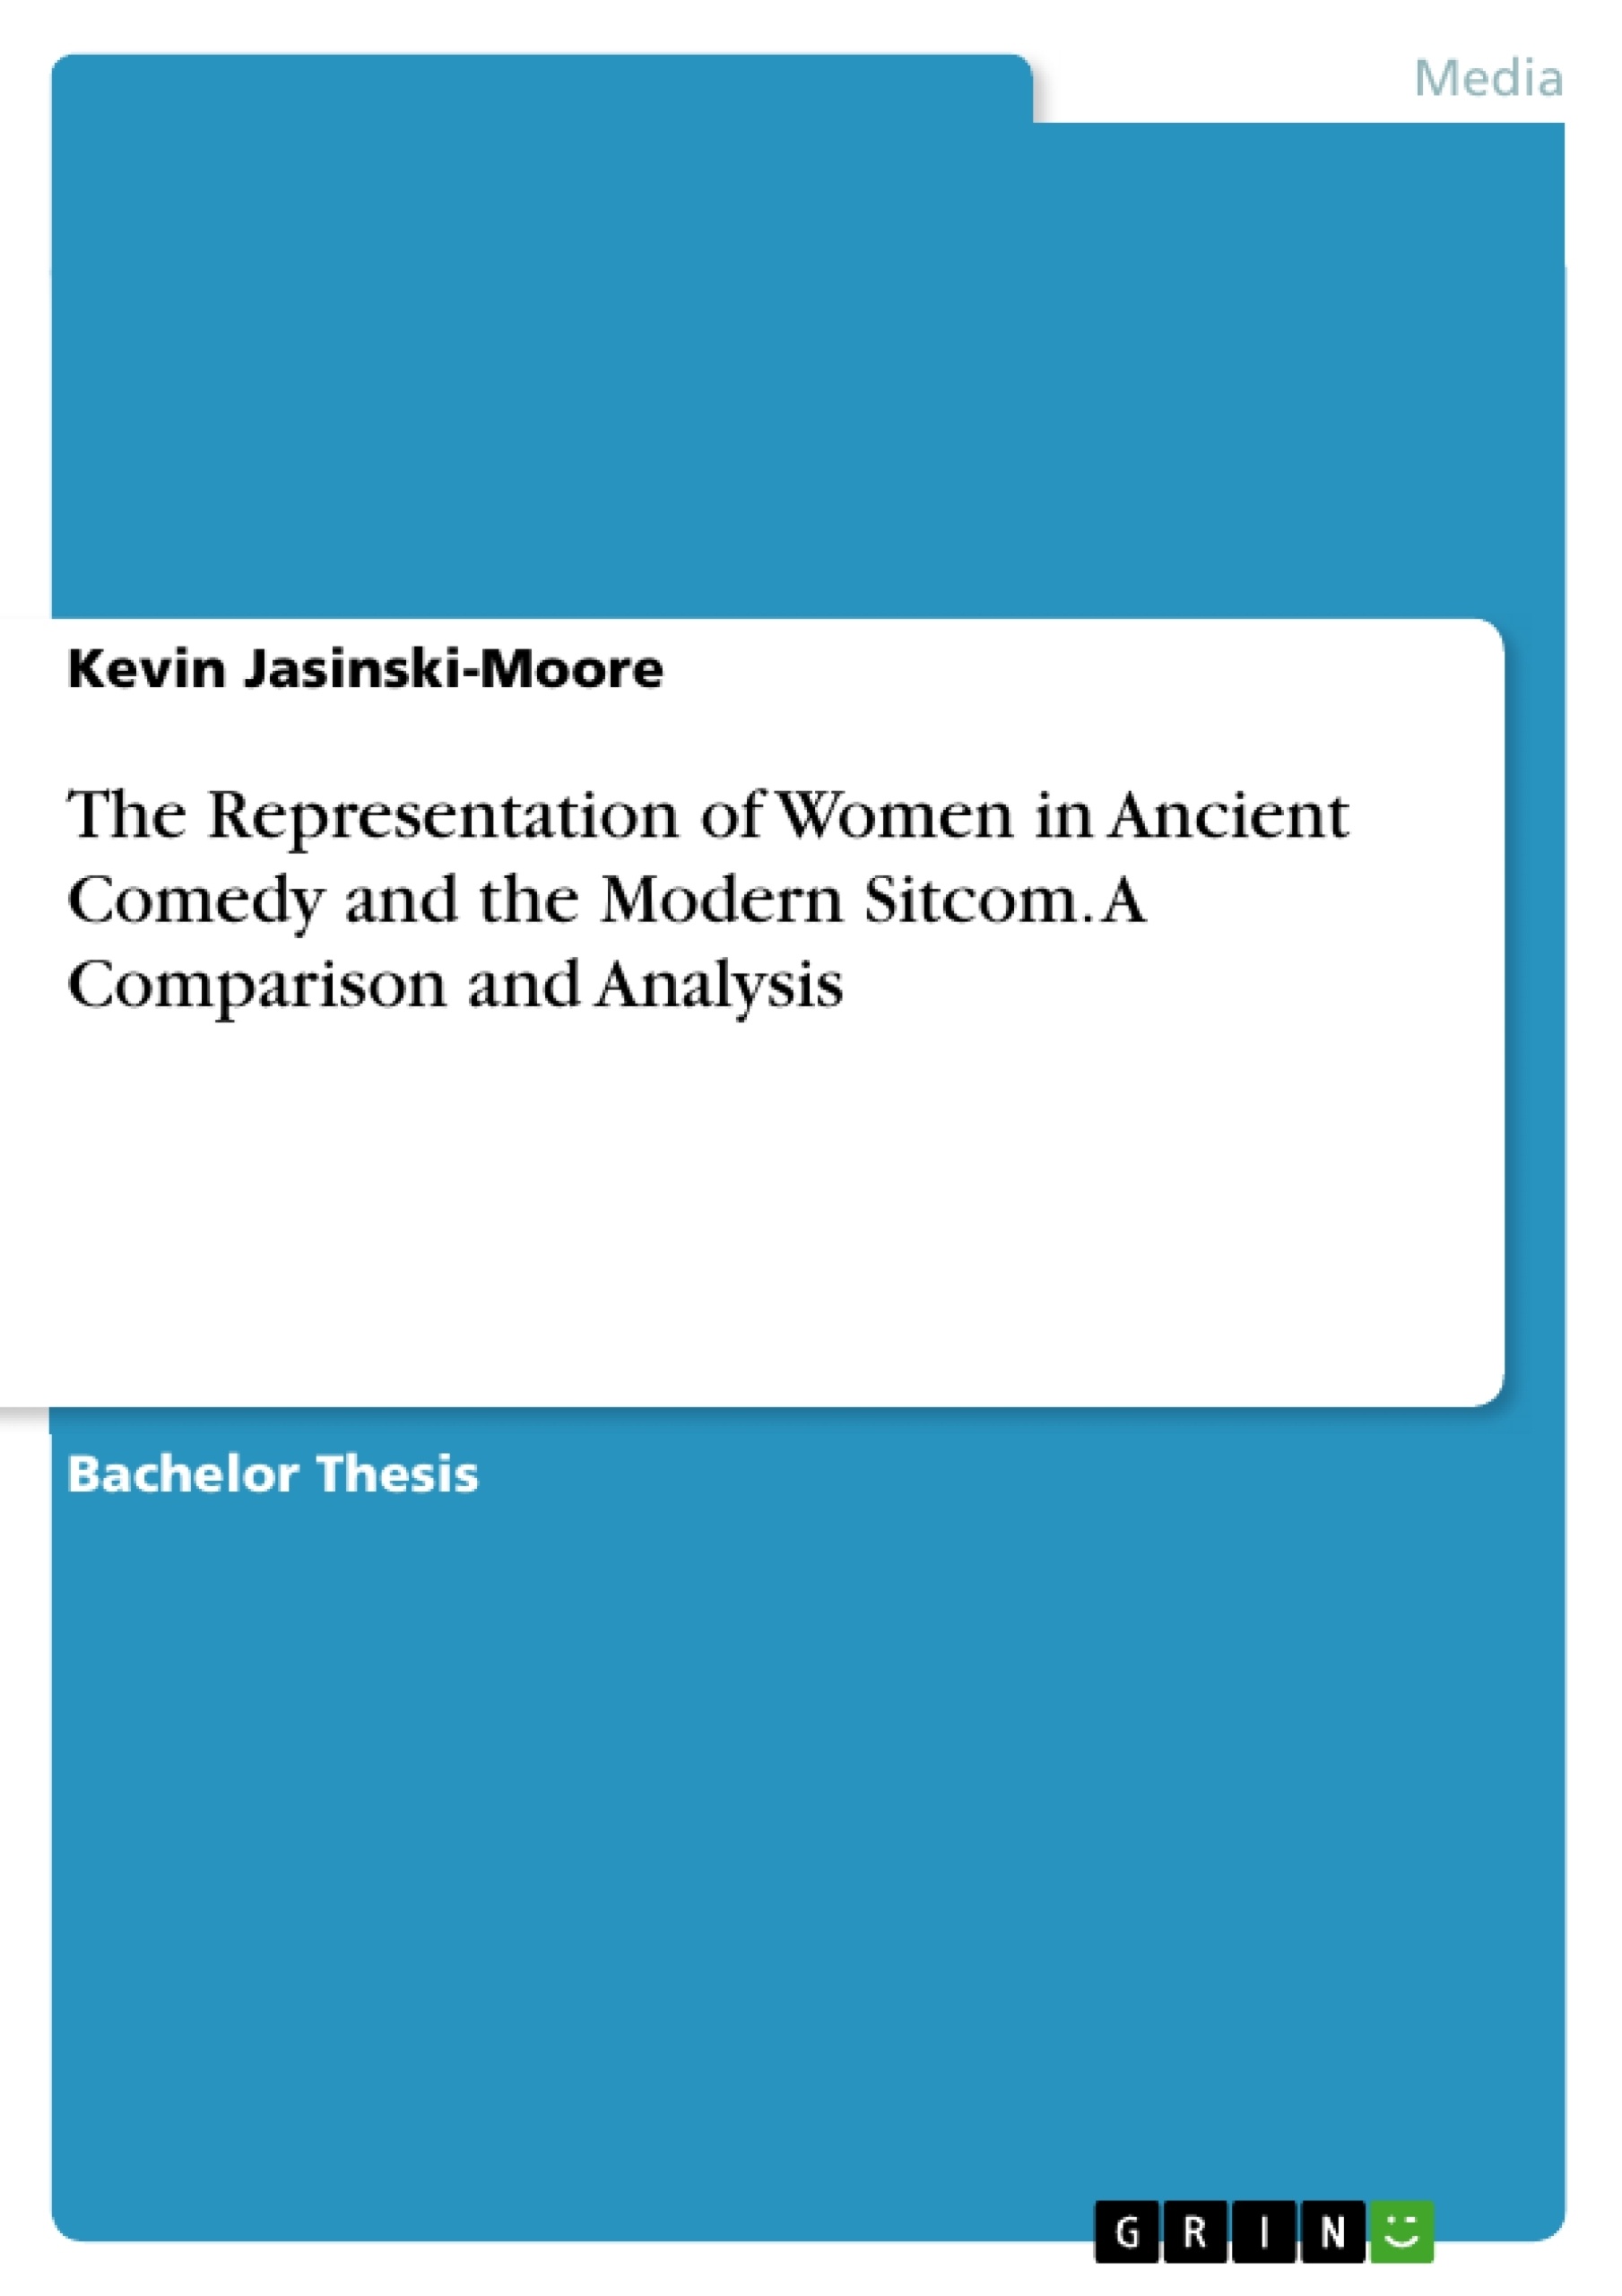 Title: The Representation of Women in Ancient Comedy and the Modern Sitcom. A Comparison and Analysis